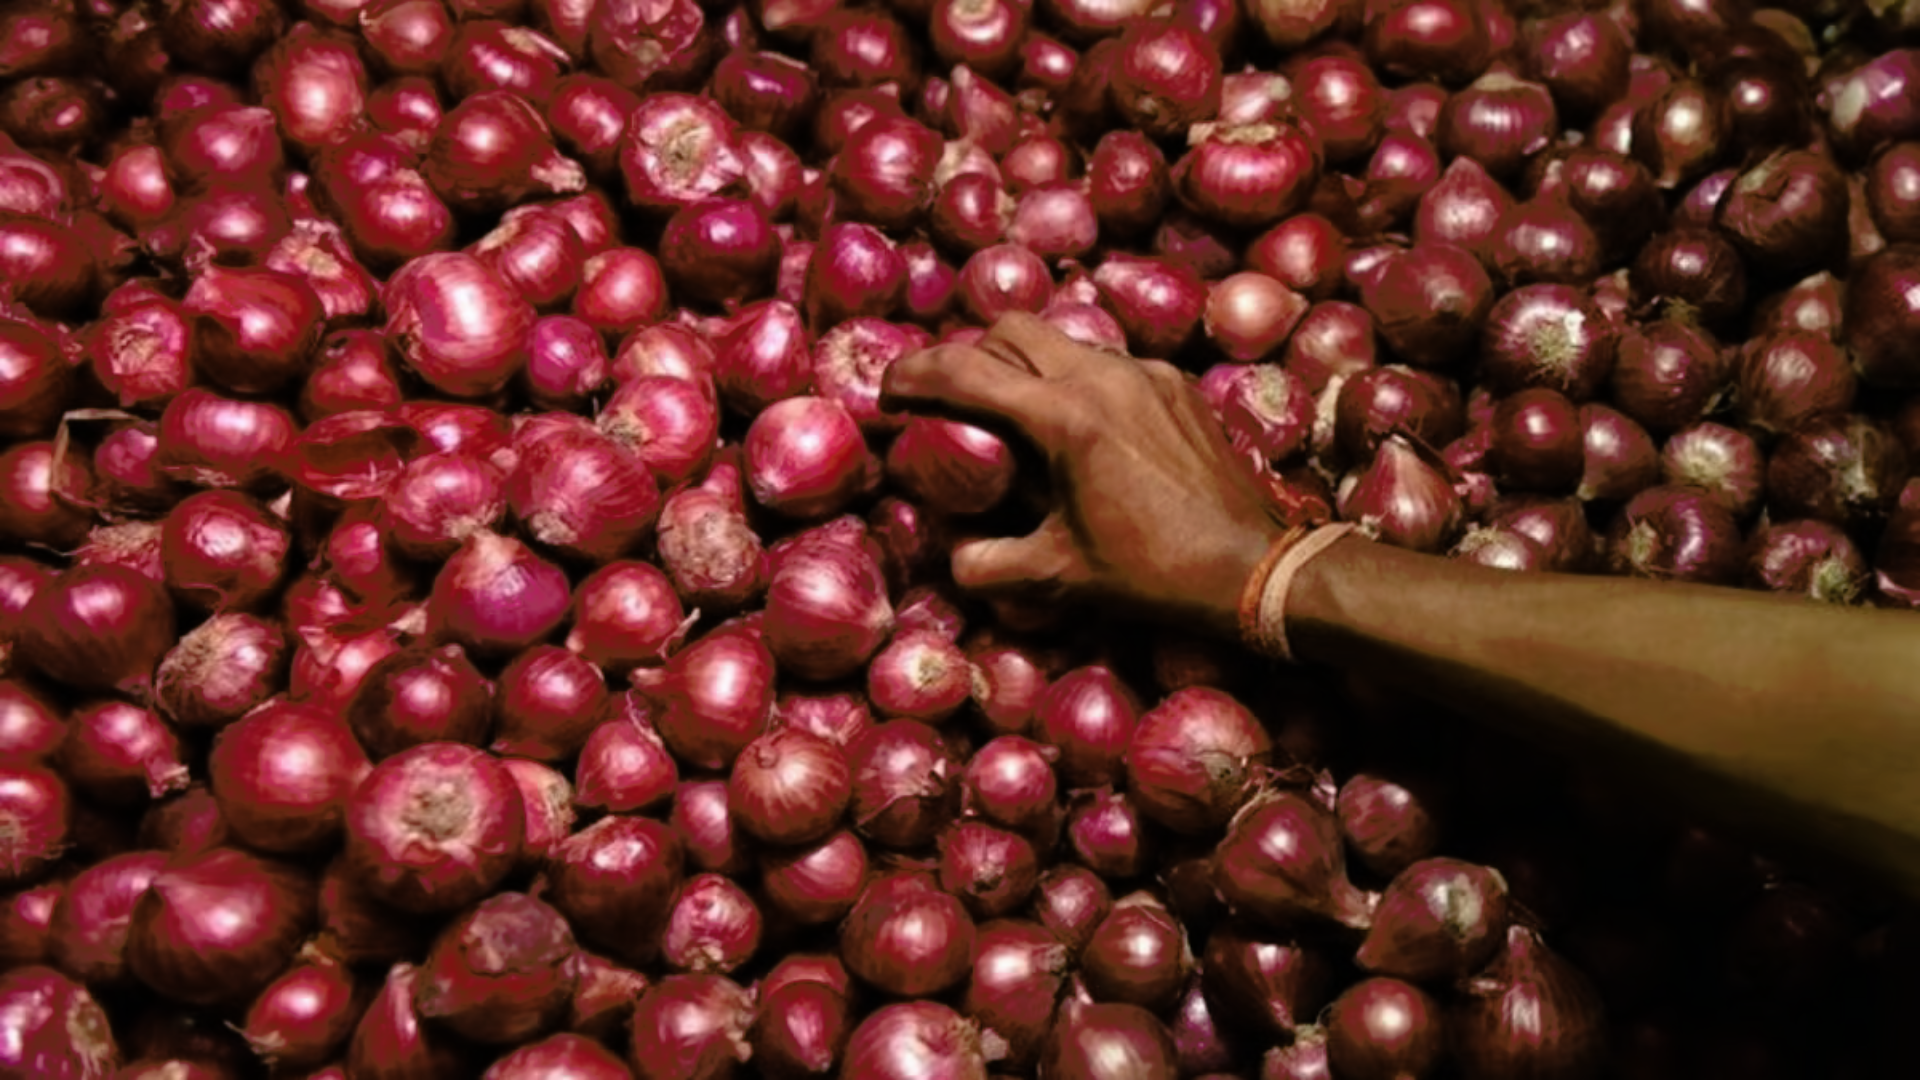 Government Lifts Ban on Onion Exports, Bringing Relief to Traders